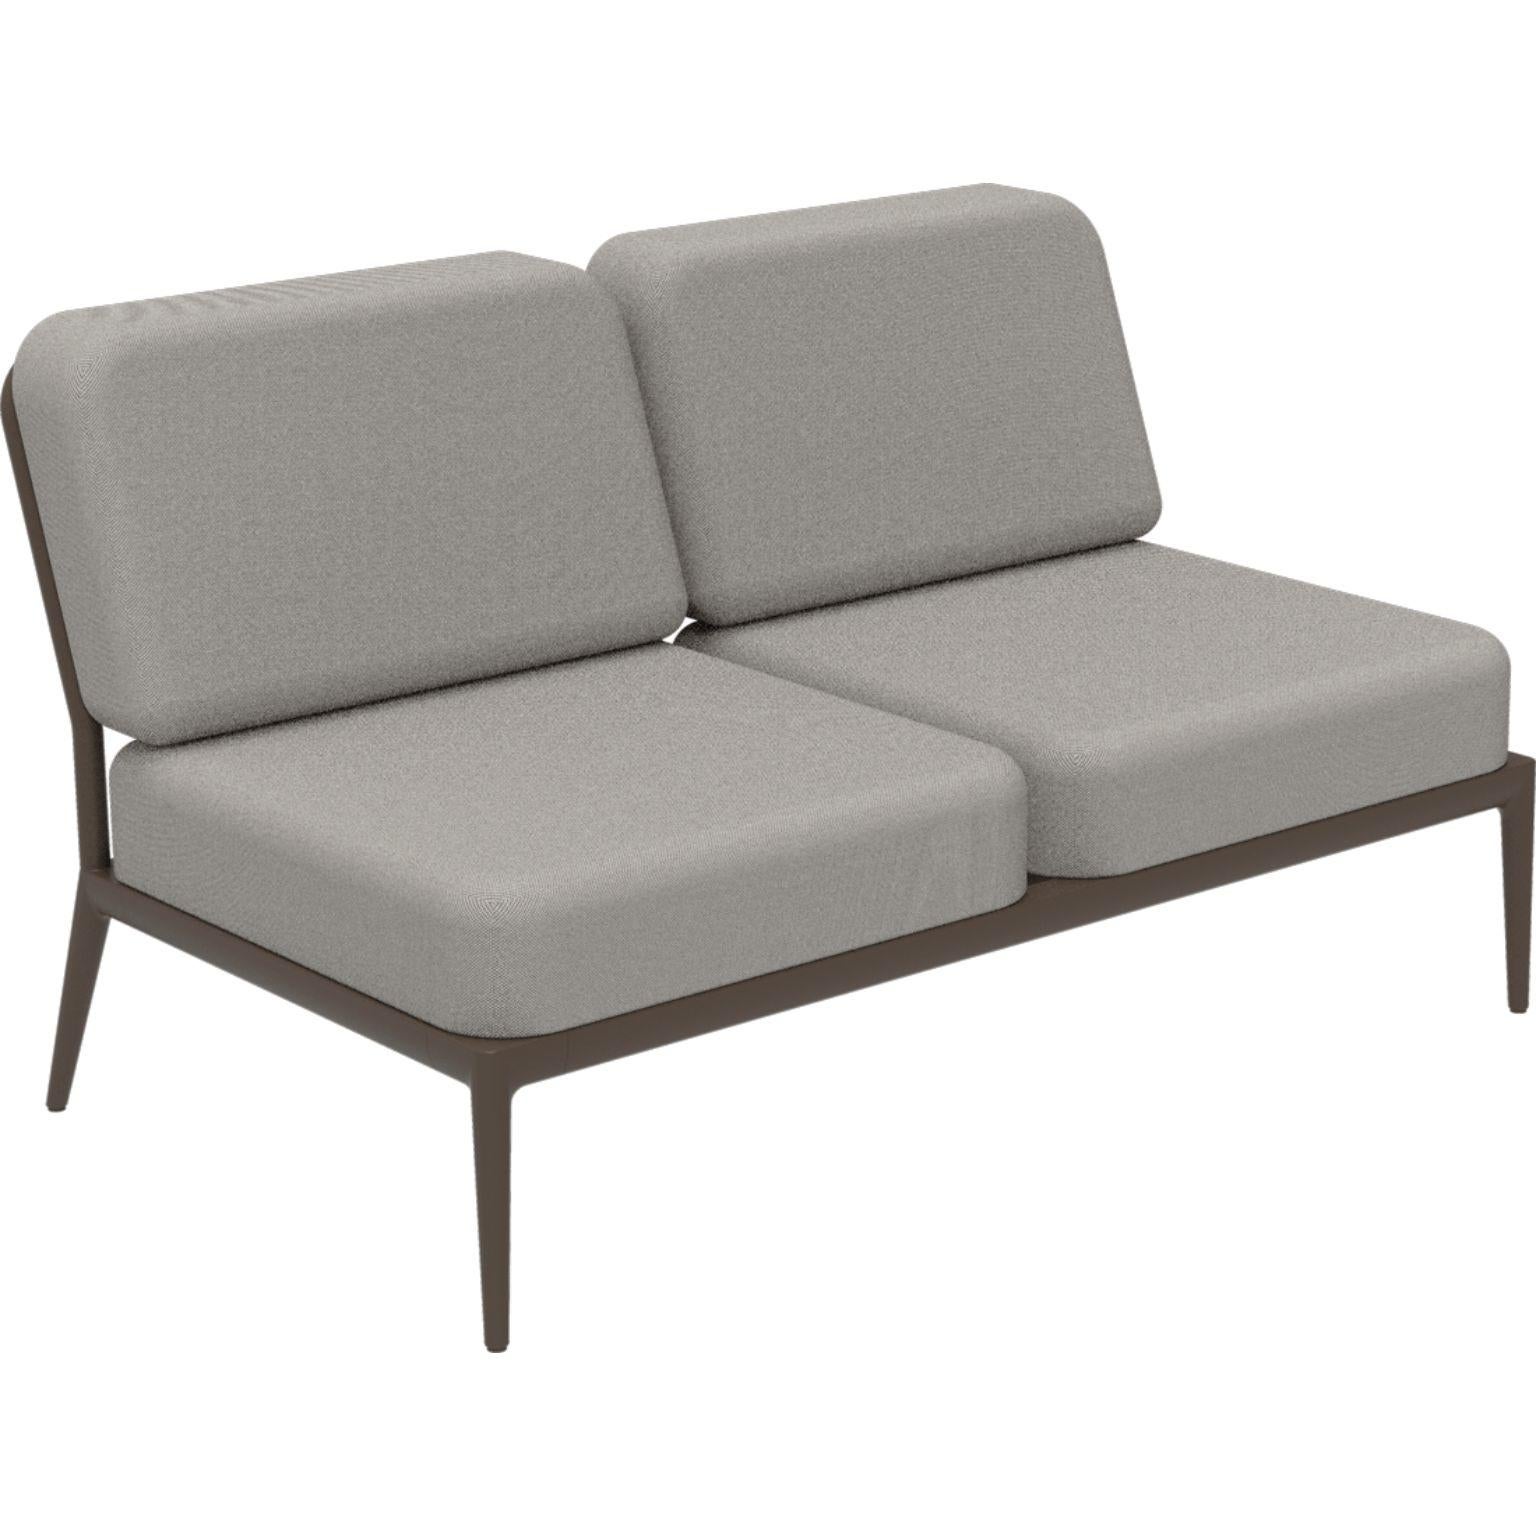 Nature bronze double central modular sofa by MOWEE
Dimensions: D83 x W136 x H81 cm (seat height 42 cm).
Material: Aluminum and upholstery.
Weight: 27 kg.
Also available in different colors and finishes.

An unmistakable collection for its